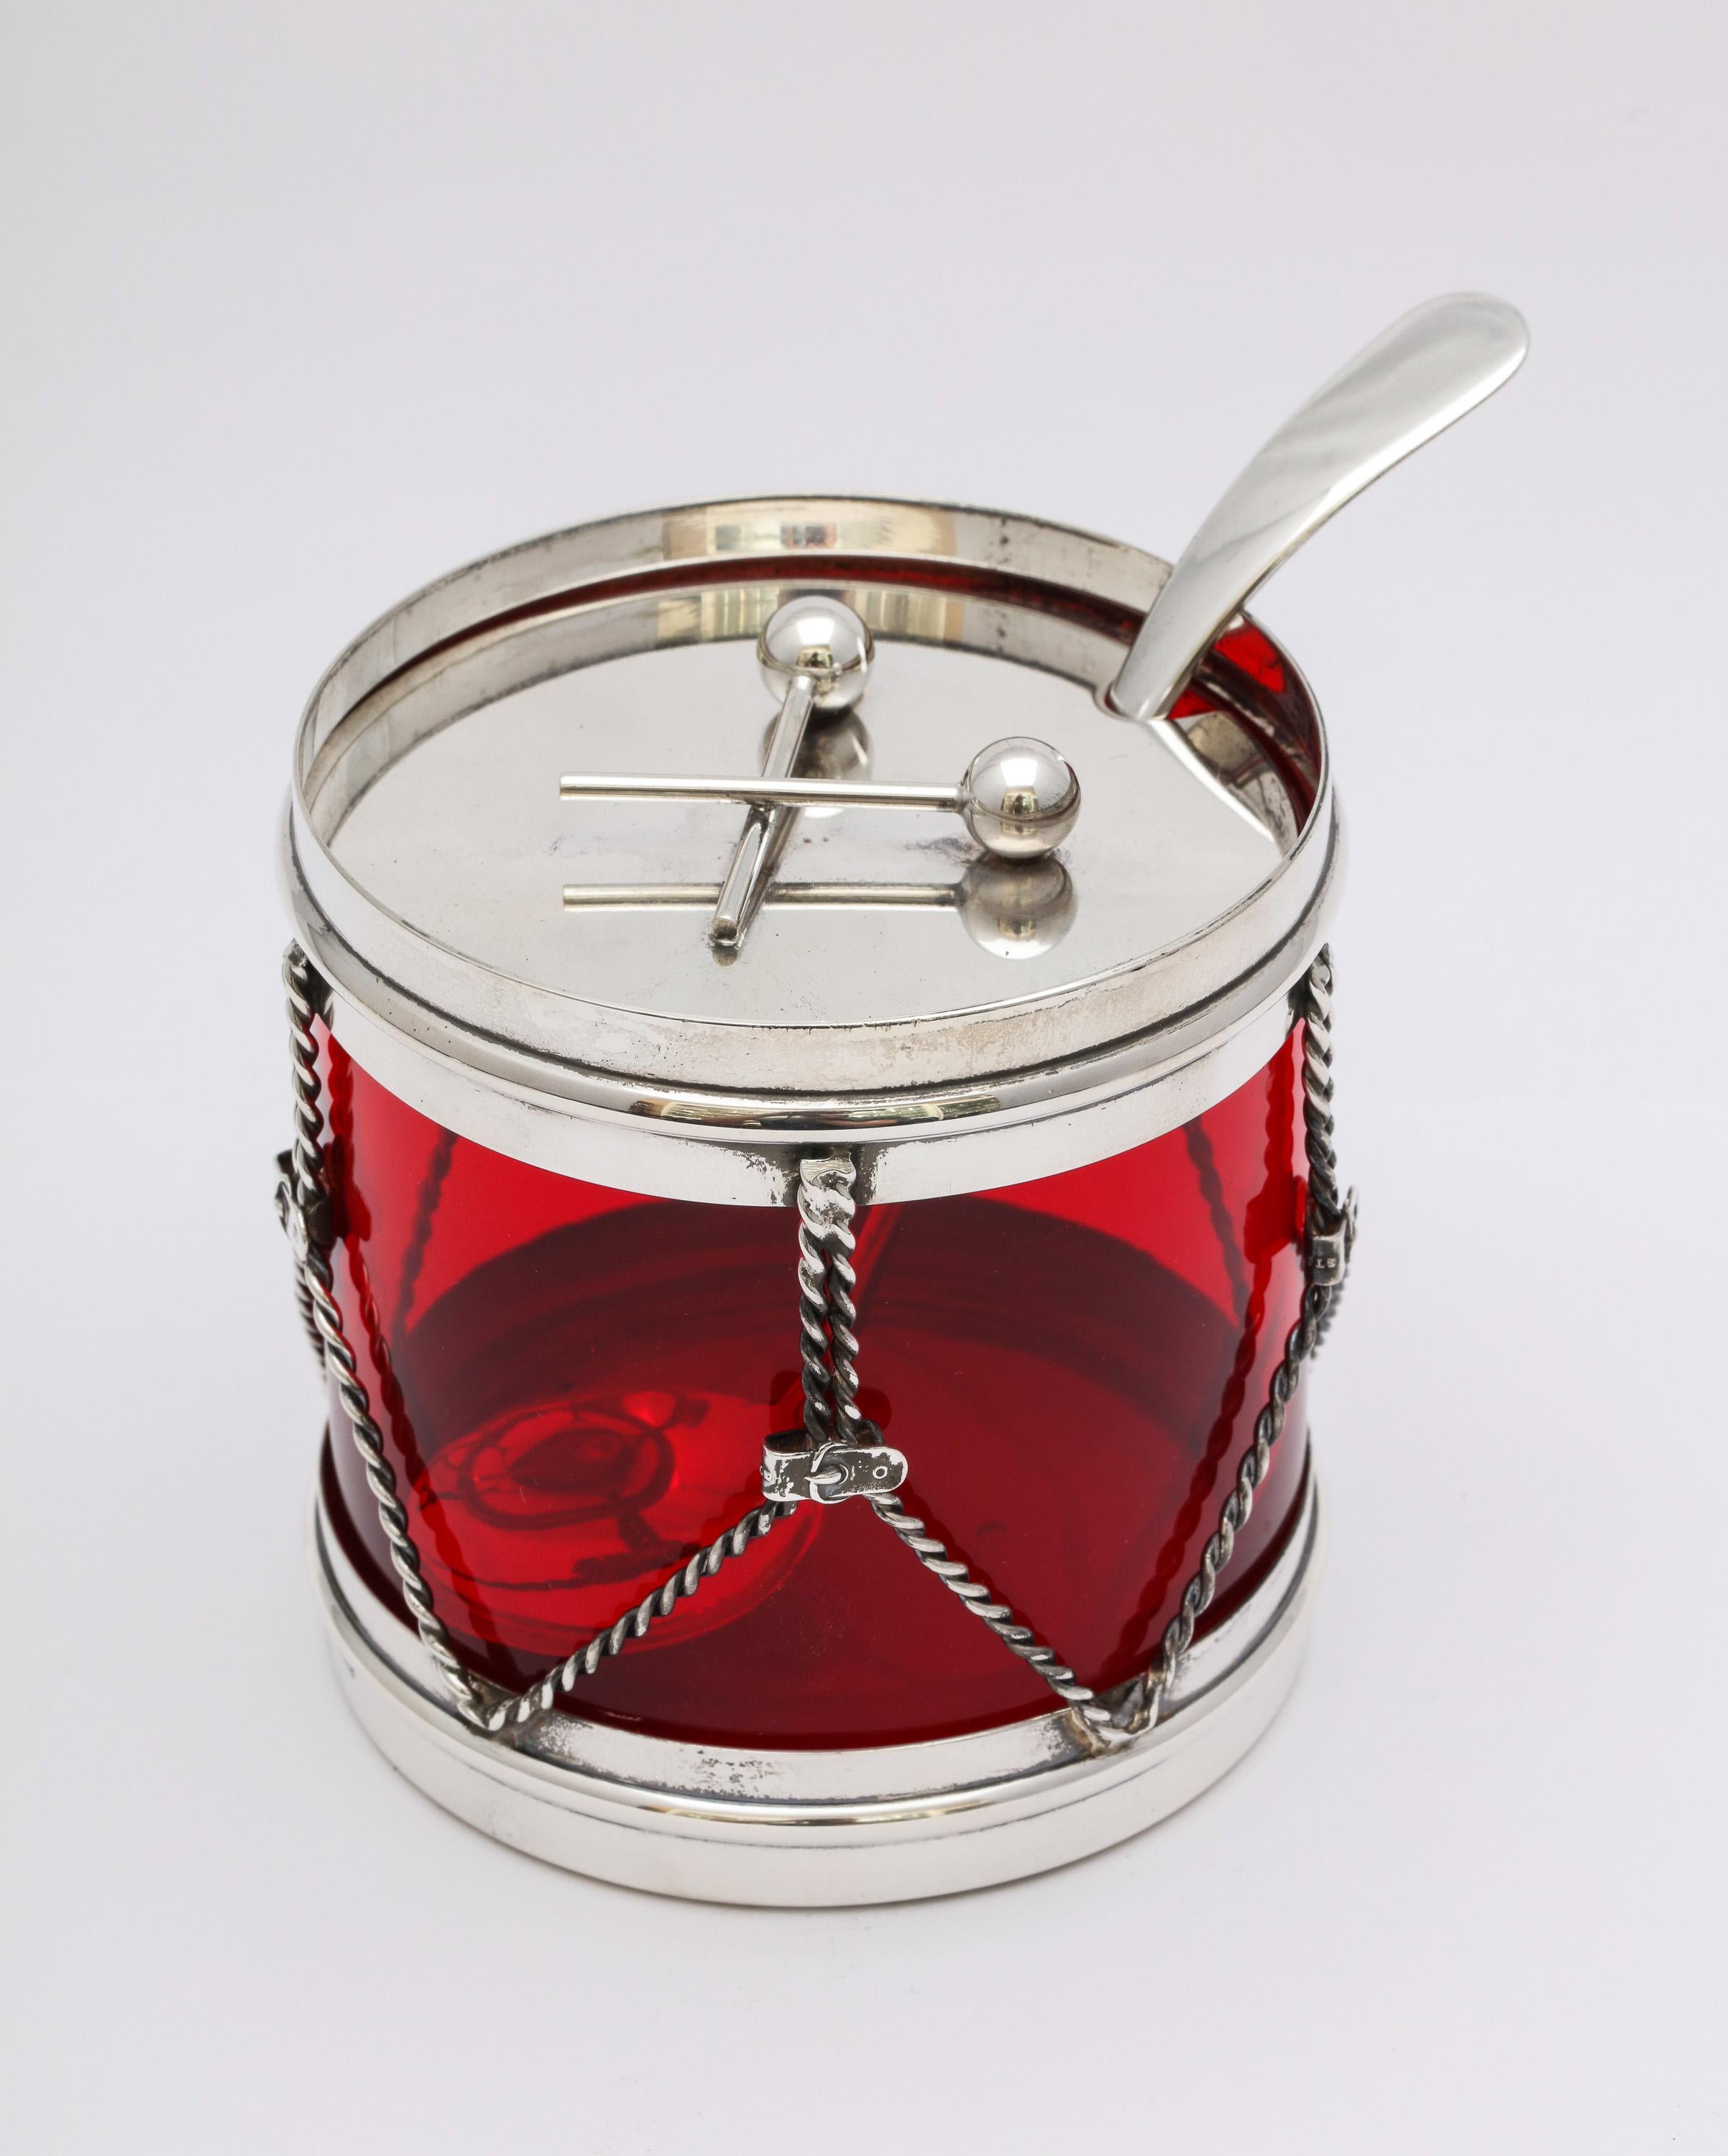 Art Deco, sterling silver-mounted red glass, drum-form condiments jar with original spoon, R. Blackinton and Co., No. Attleboro, Mass, circa 1930s. Crossed drumsticks serve as a handle to lift sterling silver lid. Red glass liner is removable.